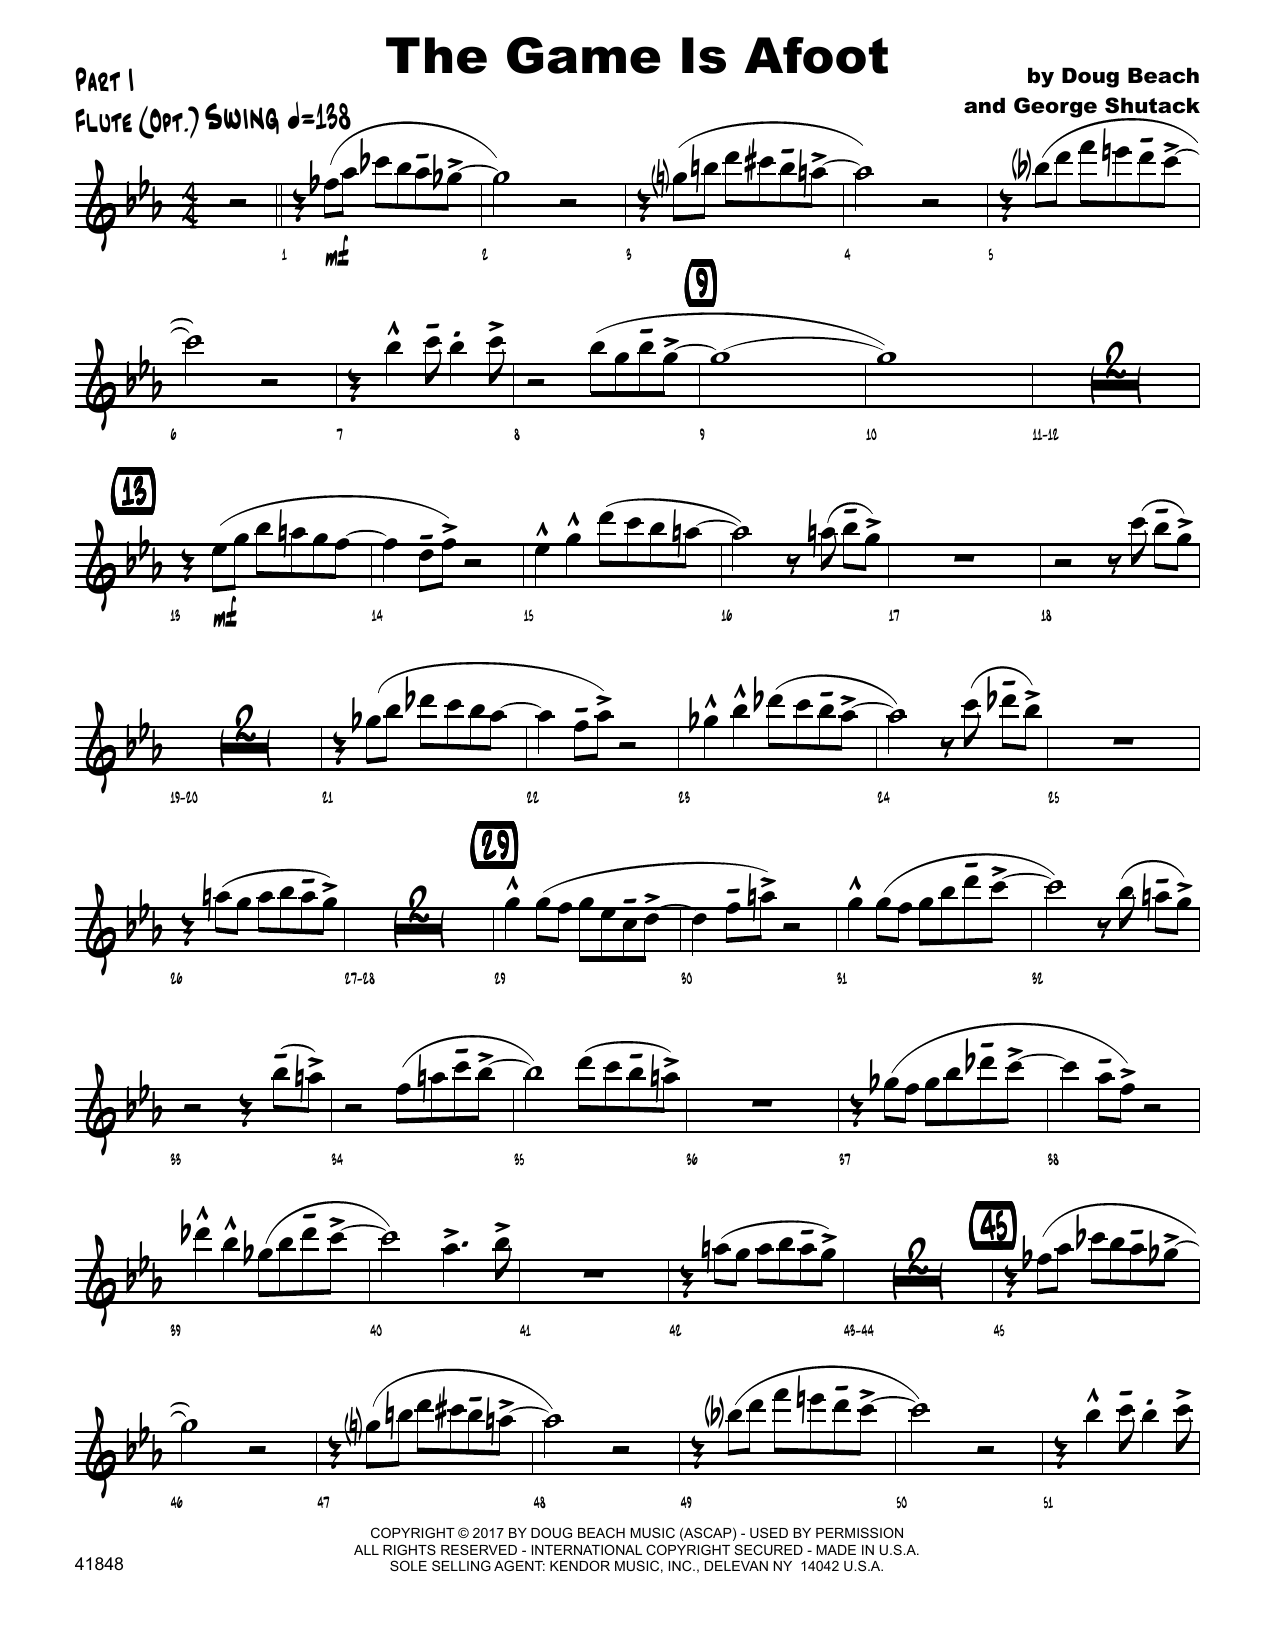 Download Doug Beach & George Shutack The Game Is Afoot - Flute Sheet Music